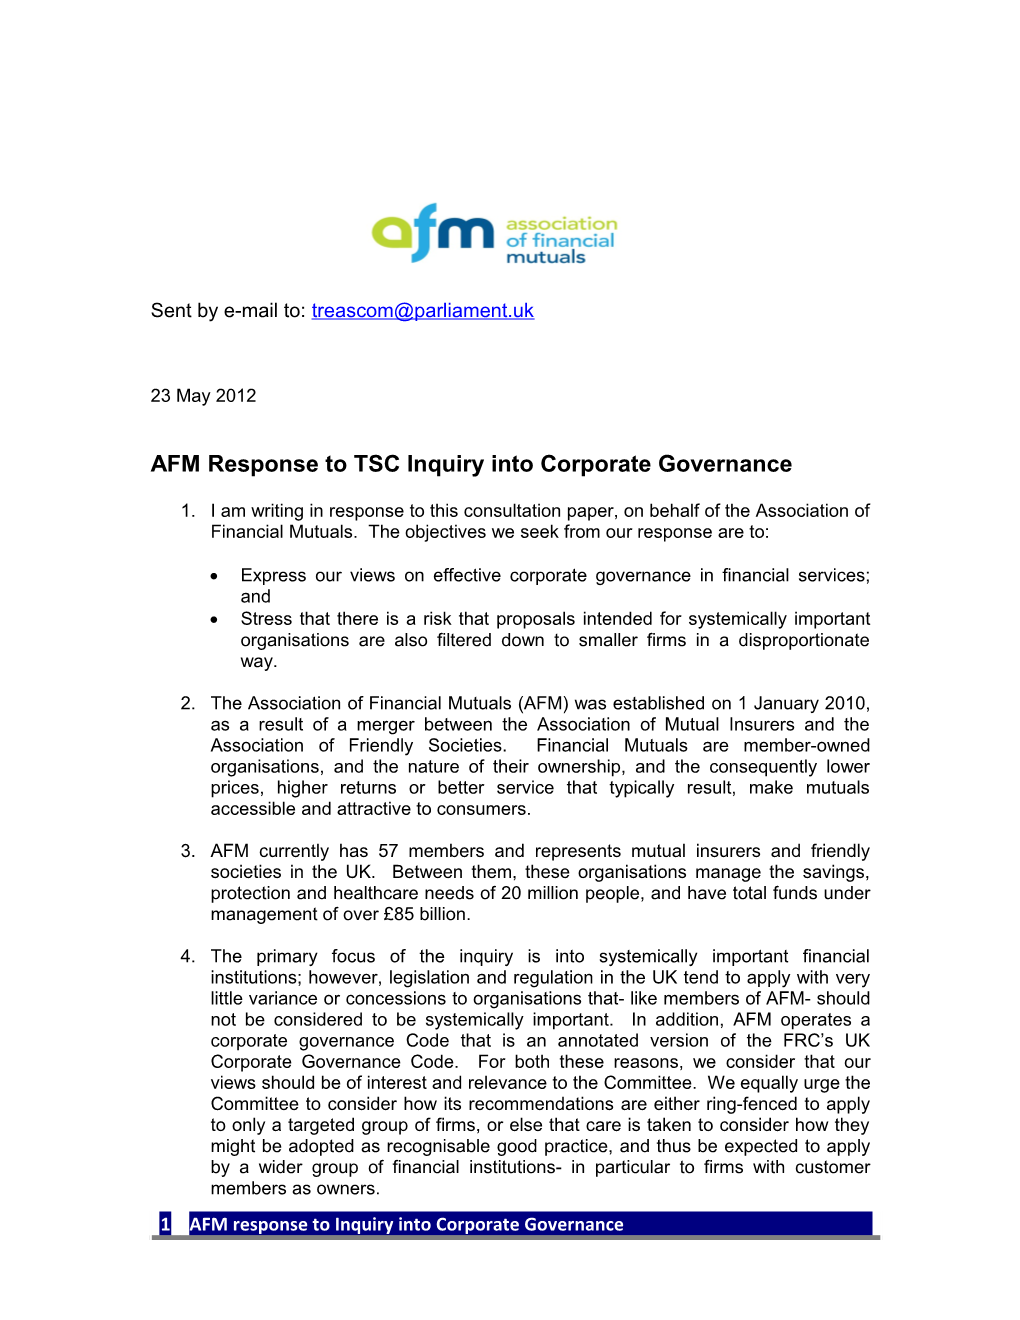 AFM Response to TSC Inquiry Into Corporate Governance